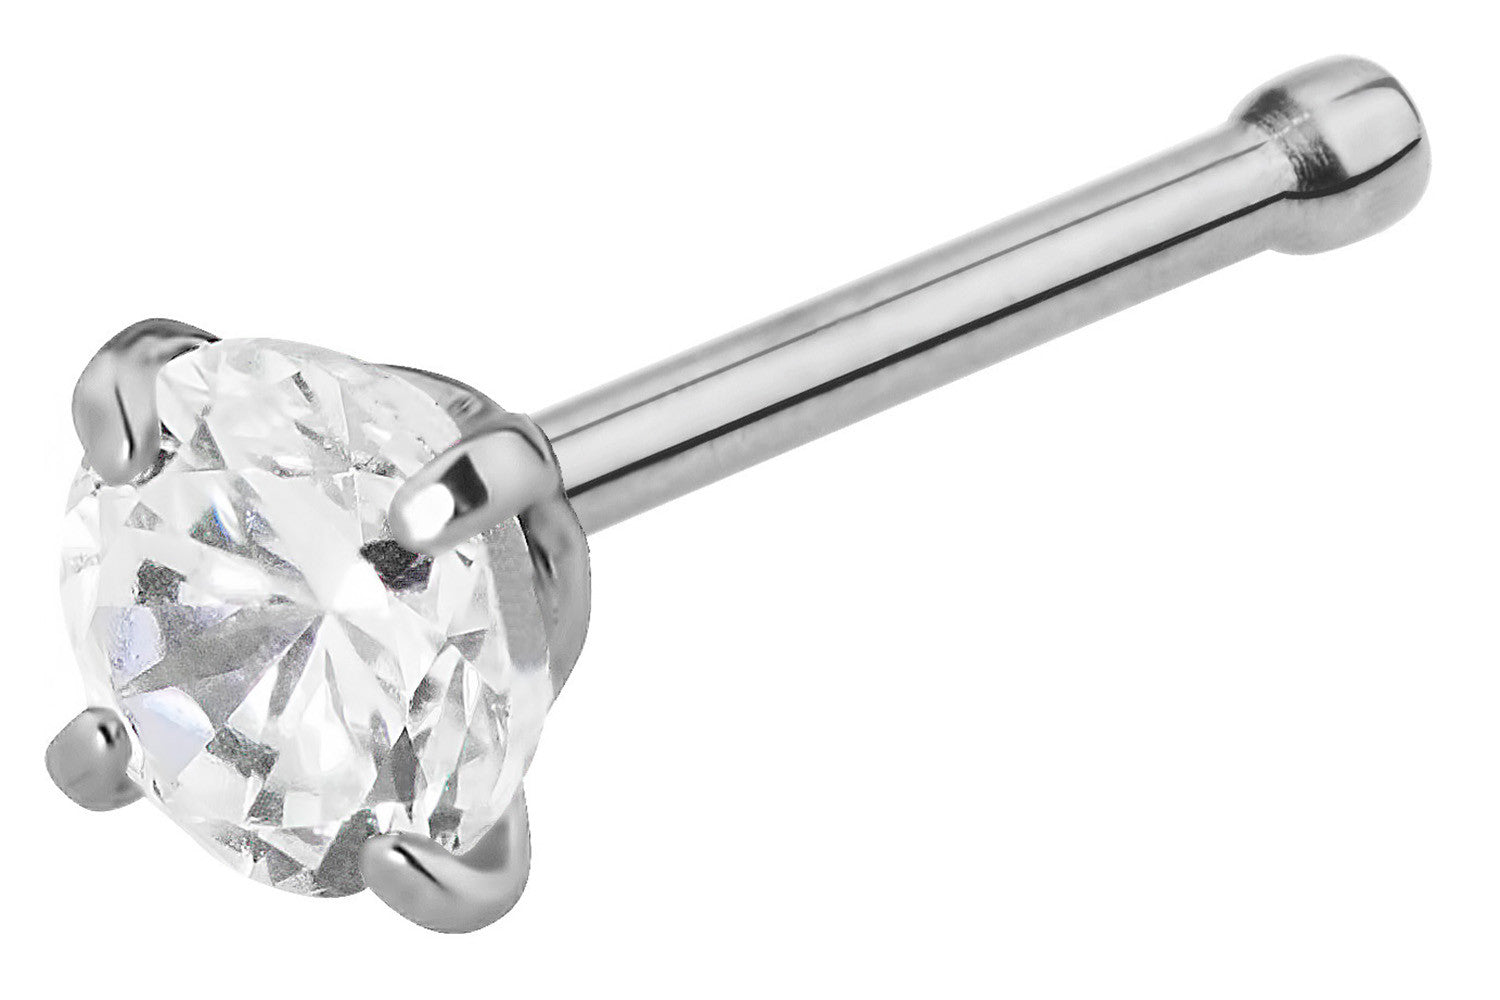 This 20 gauge nose stud  is made with surgical grade 316L stainless steel. The straight nose stud features a 3 mm Cubic Zirconia crystal. This body jewelry is hypoallergenic and nickel free. The wearable length is 7 mm and this jewelry has a slightly rounded end to keep the stud securely in place.